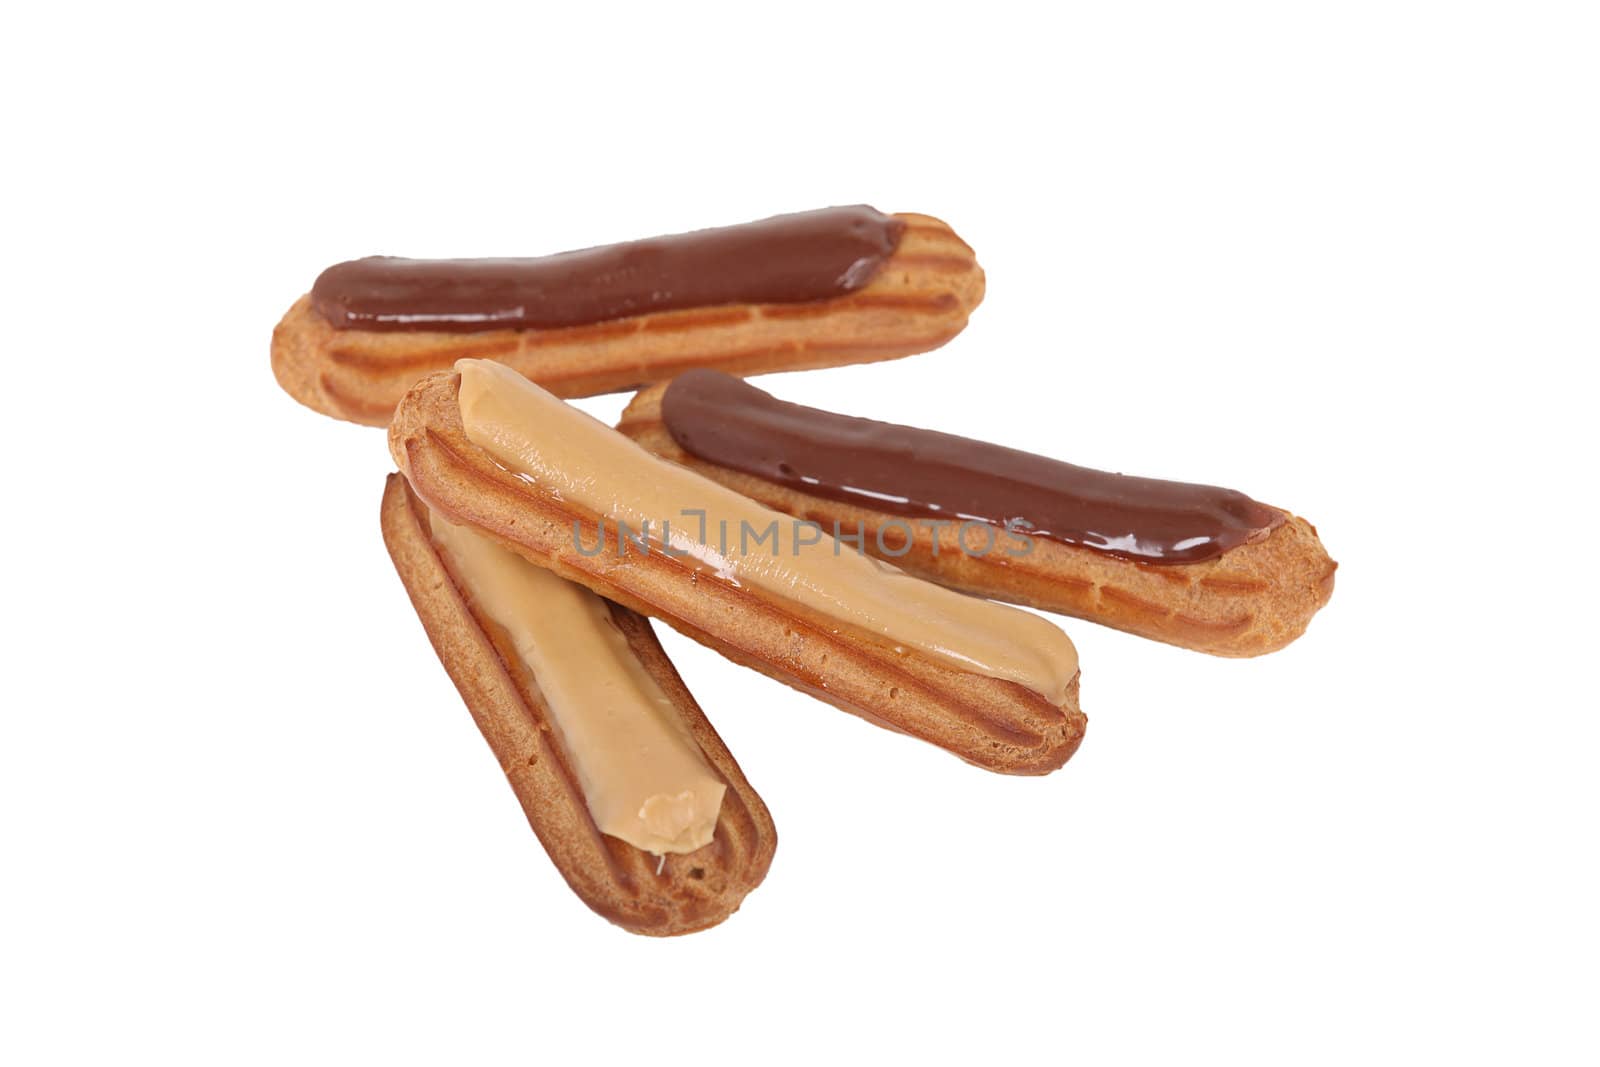 Selection of eclairs by phovoir